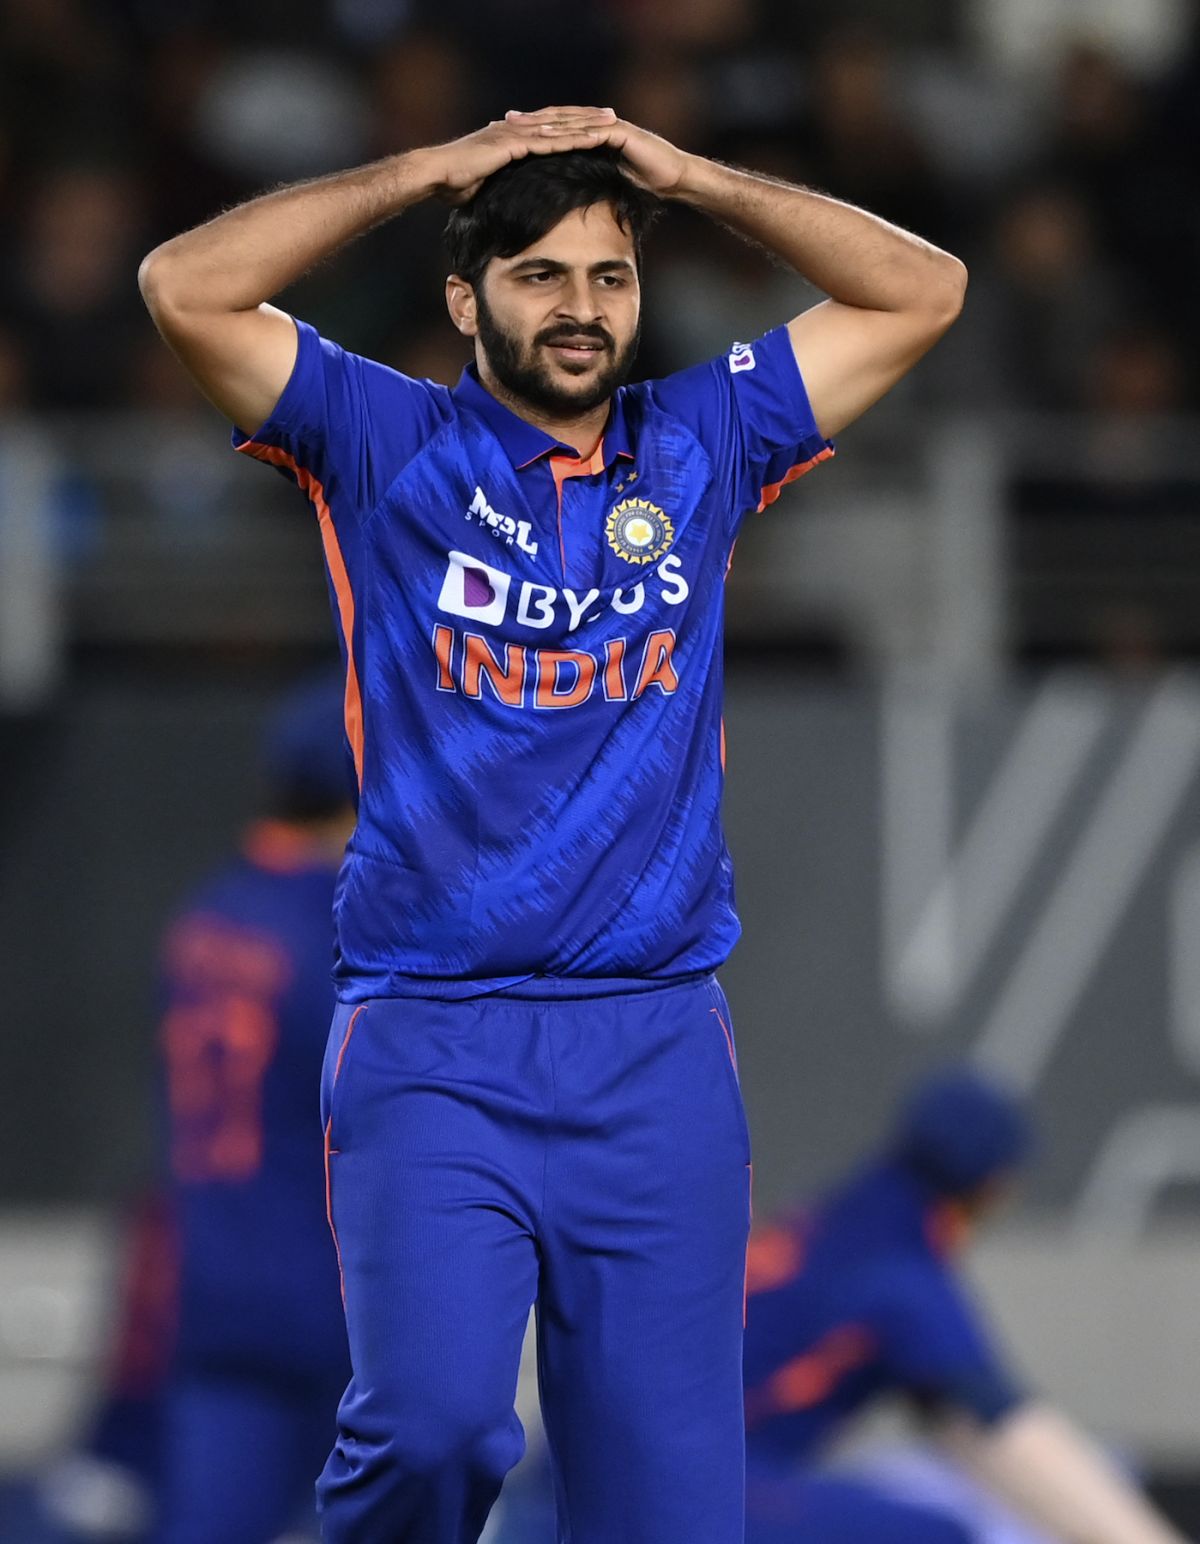 Shardul Thakur doesn't look happy as the game runs away from India, New Zealand vs India, 1st men's ODI, Auckland, November 25, 2022